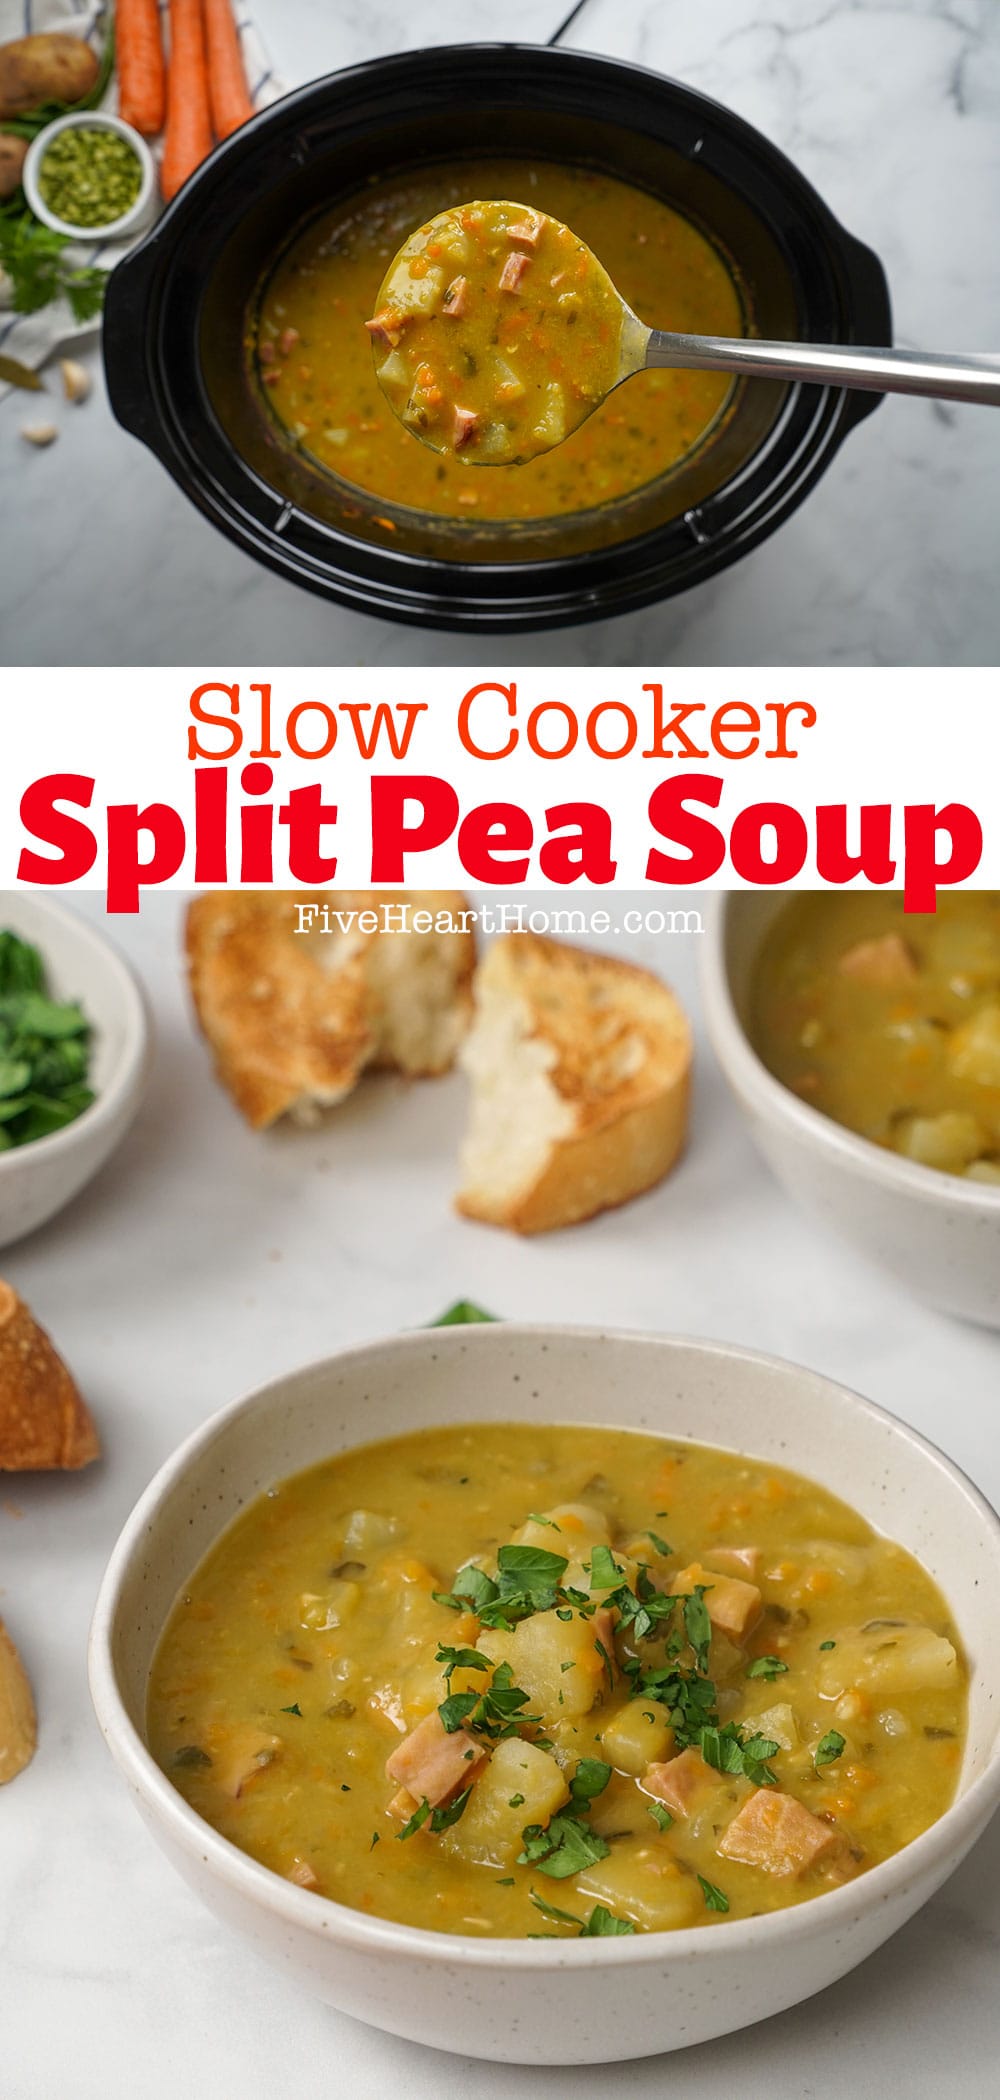 Slow Cooker Split Pea Soup ~ warm, comforting, and easy to make, this hearty crockpot soup is loaded with ham, potatoes, and carrots! | FiveHeartHome.com via @fivehearthome